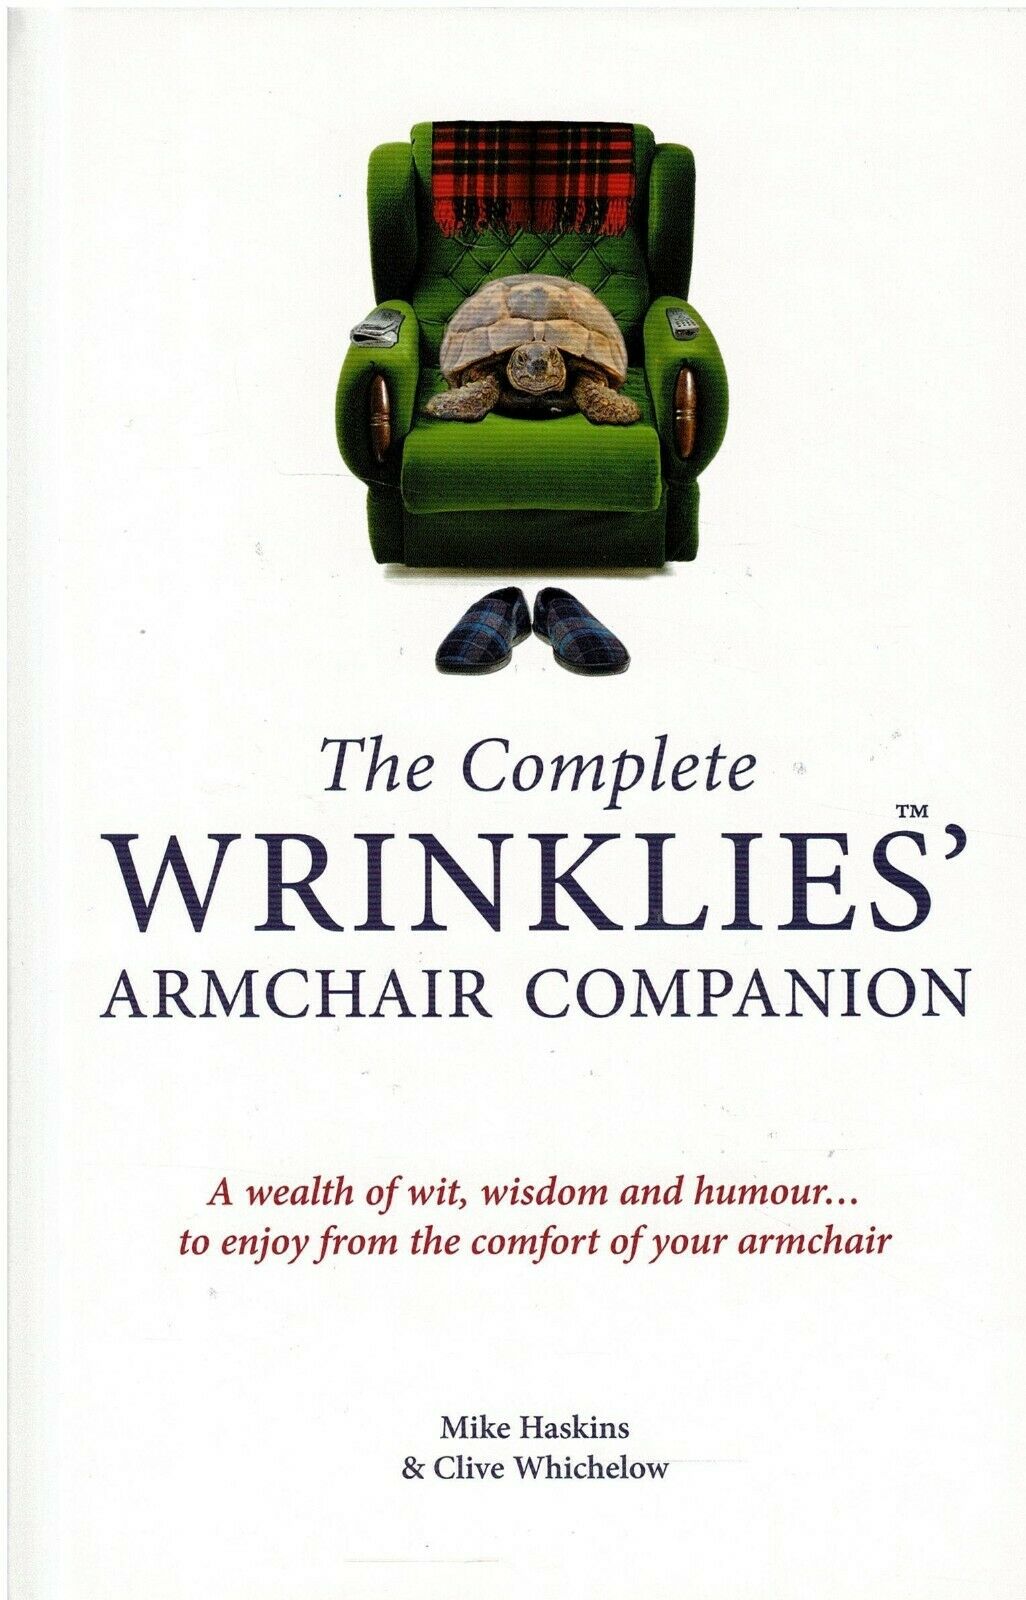 The Complete Wrinklies Armchair Companion - Clive Whichelow and Mike Haskins